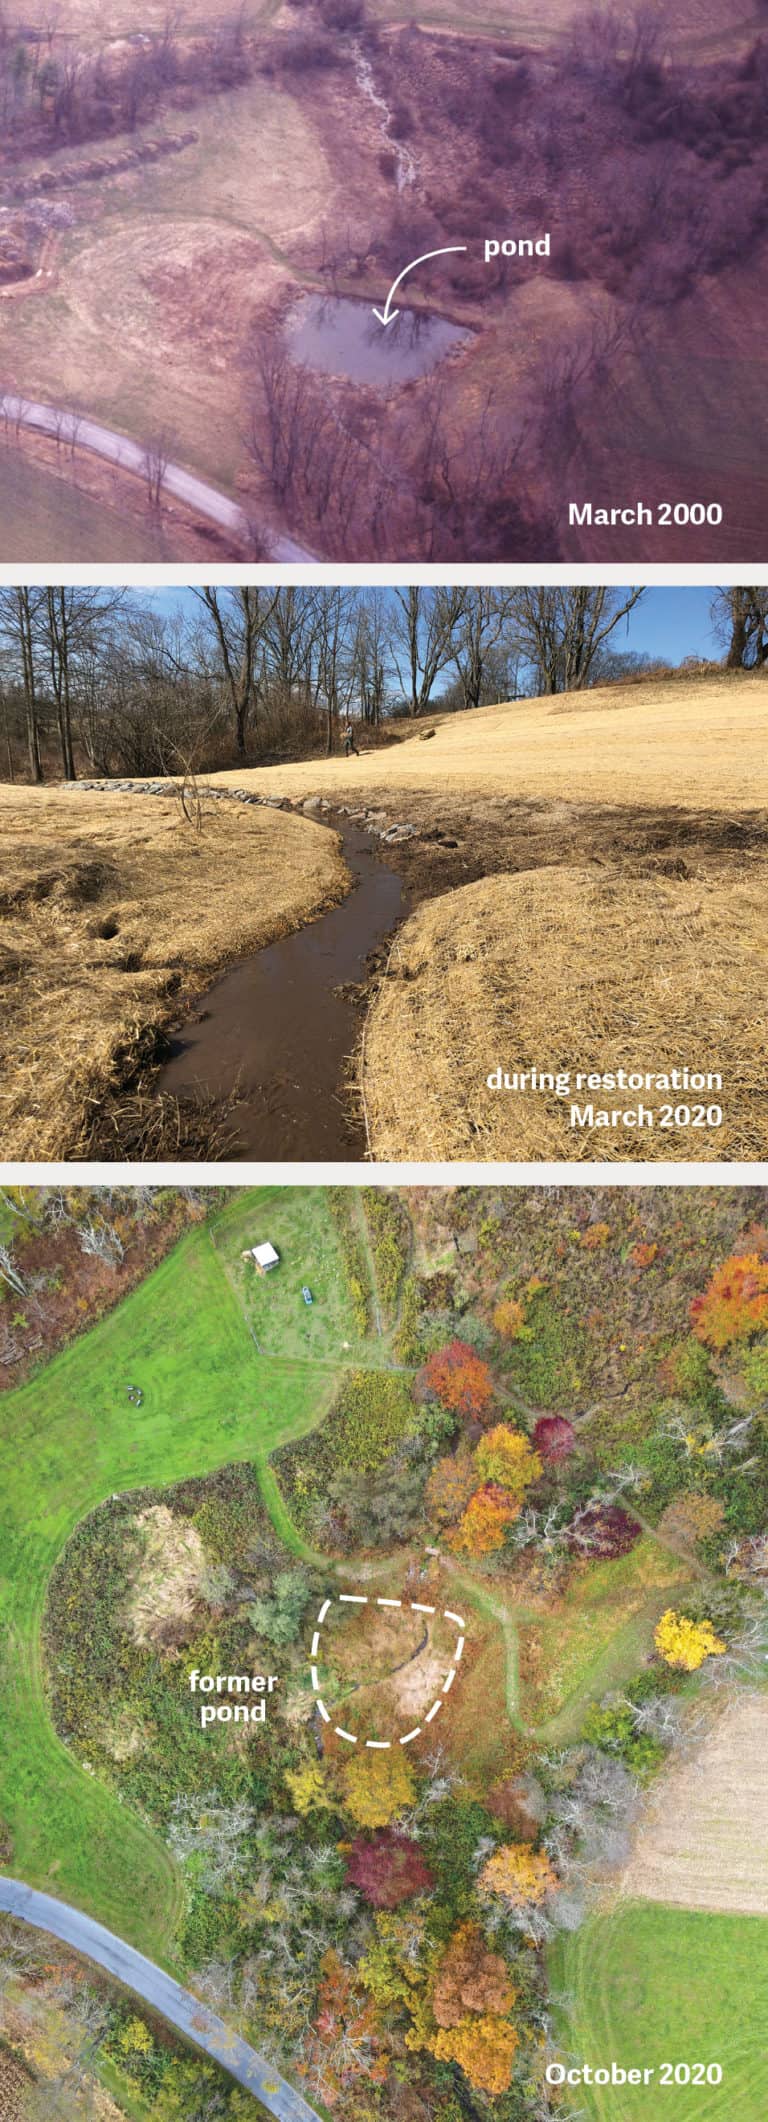 Three photos over time of an aerial view of a natural area where the pond was removed and the vegetation restored